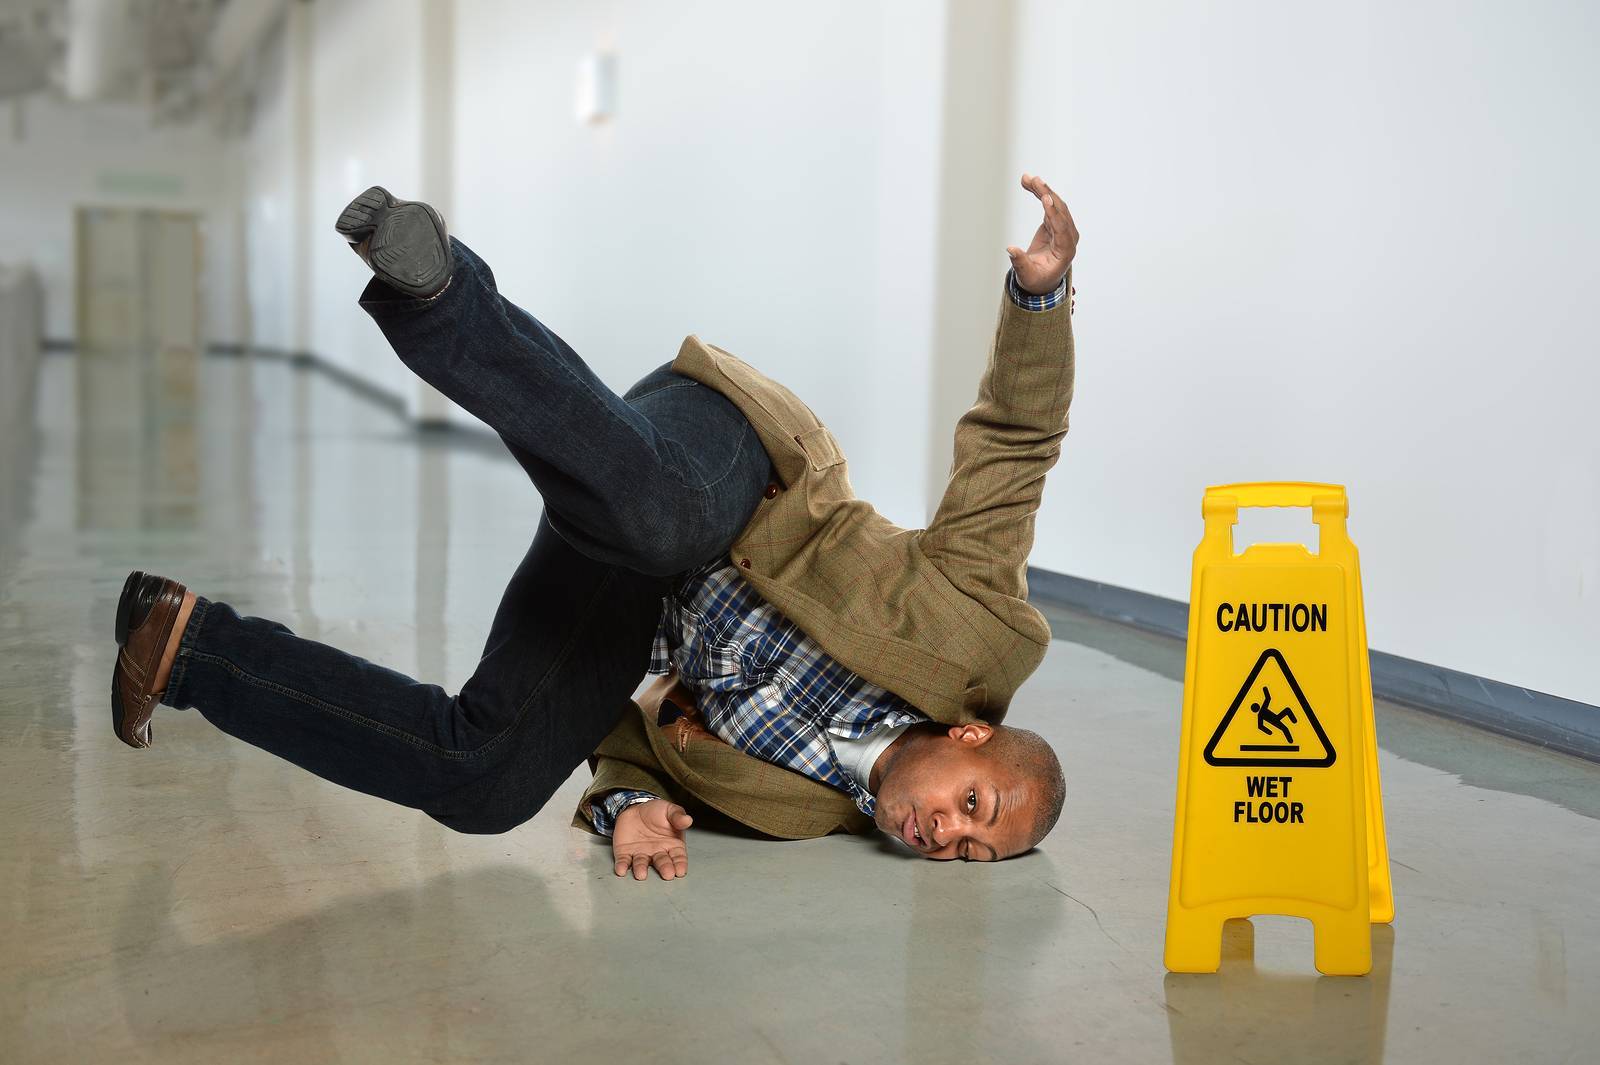 What Are Your Options After a Slip and Fall Accident?